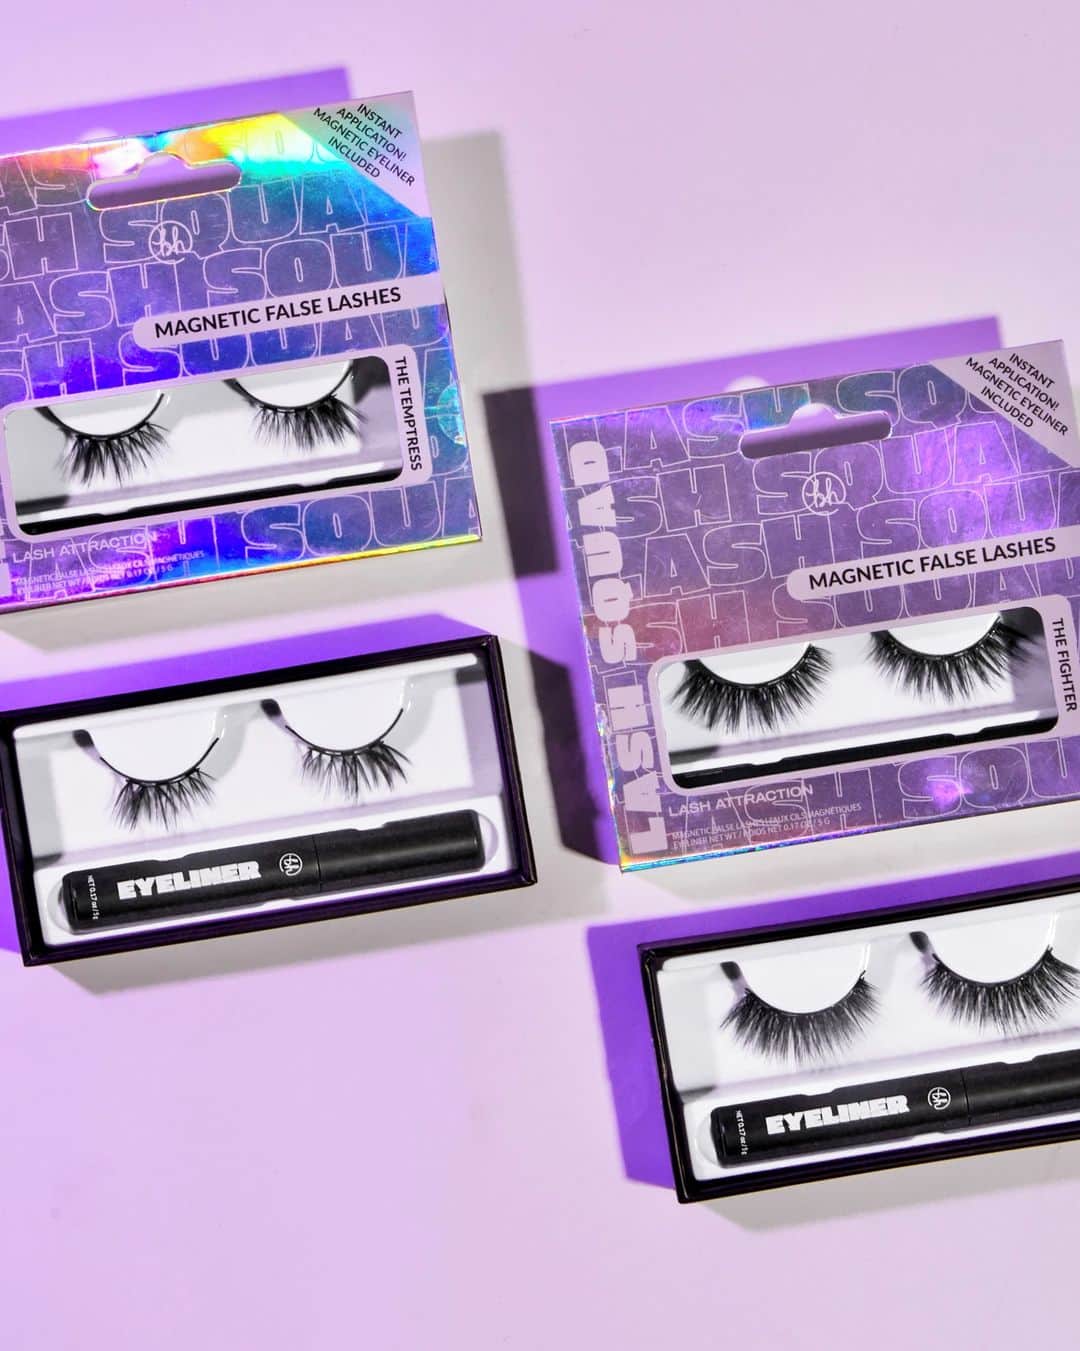 BH Cosmeticsのインスタグラム：「Deluxe magnetic lashes and liner for an instant upgrade to any eye look​ - no adhesive needed! 🧲🤩 Leave a 💗 in the comments if you're adding our Lash Attraction - Magnetic Lash Kits to your cart 👇🛒⁣⁣ ⁣⁣ ​👀 Lightweight, comfortable falsies⁣⁣ ​👀 Long-wearing, non-smudging magnetic eyeliner for seamless application⁣⁣ ⁣⁣ Available in 2 varieties:​⁣⁣ ✨ The Temptress: Straight, slightly tapered fibers in a half lash style for a natural effect​⁣⁣ ✨ The Fighter: Wispy fibers for a voluminous cat eye effect⁣⁣ ⁣⁣ #bhlashes #bhcosmetics」